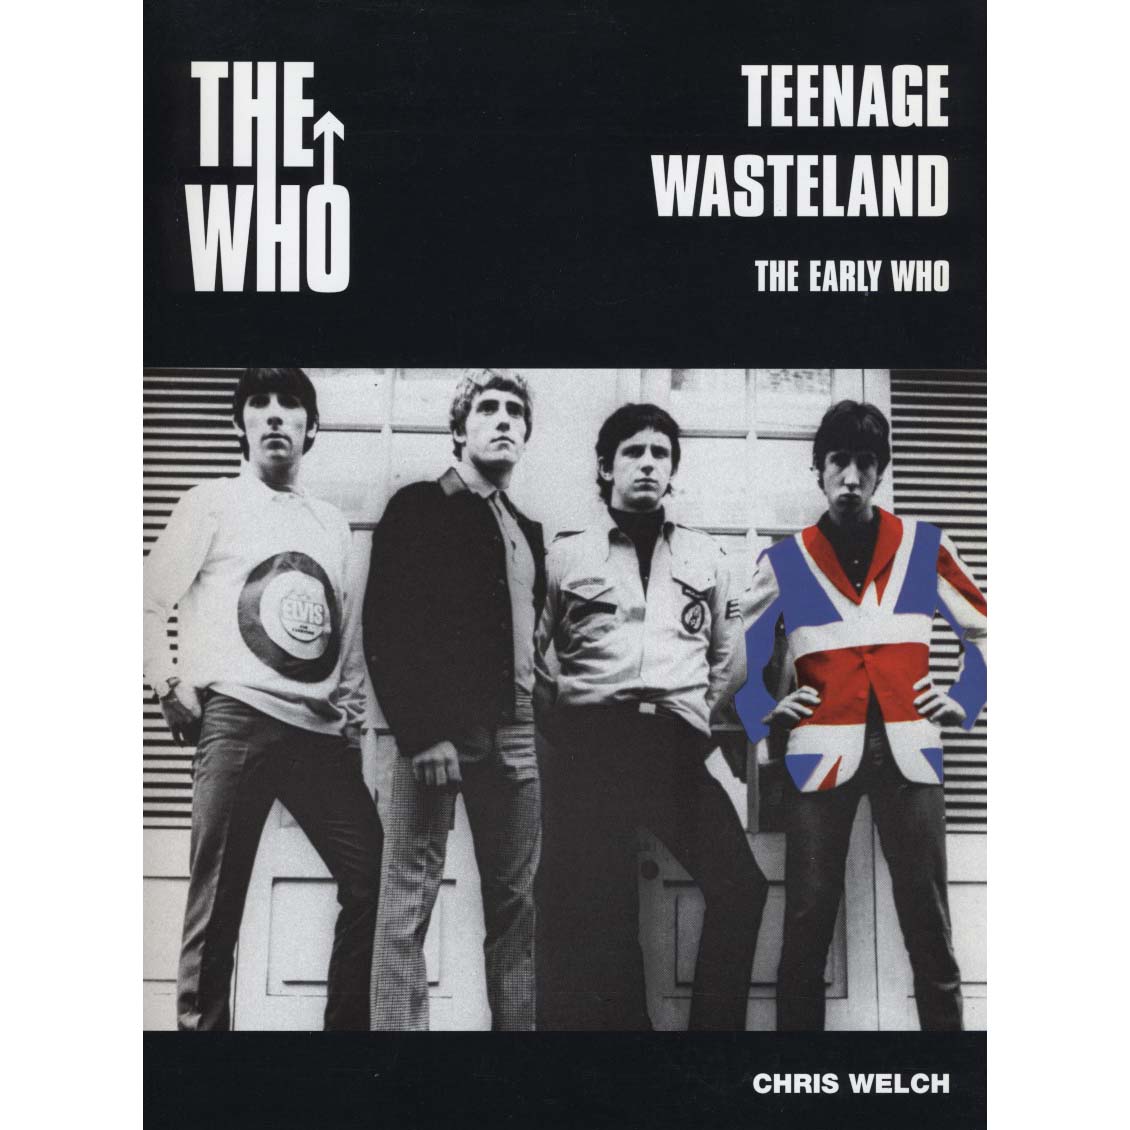 Teenage Wasteland: The Early Years (Welch, Chris)